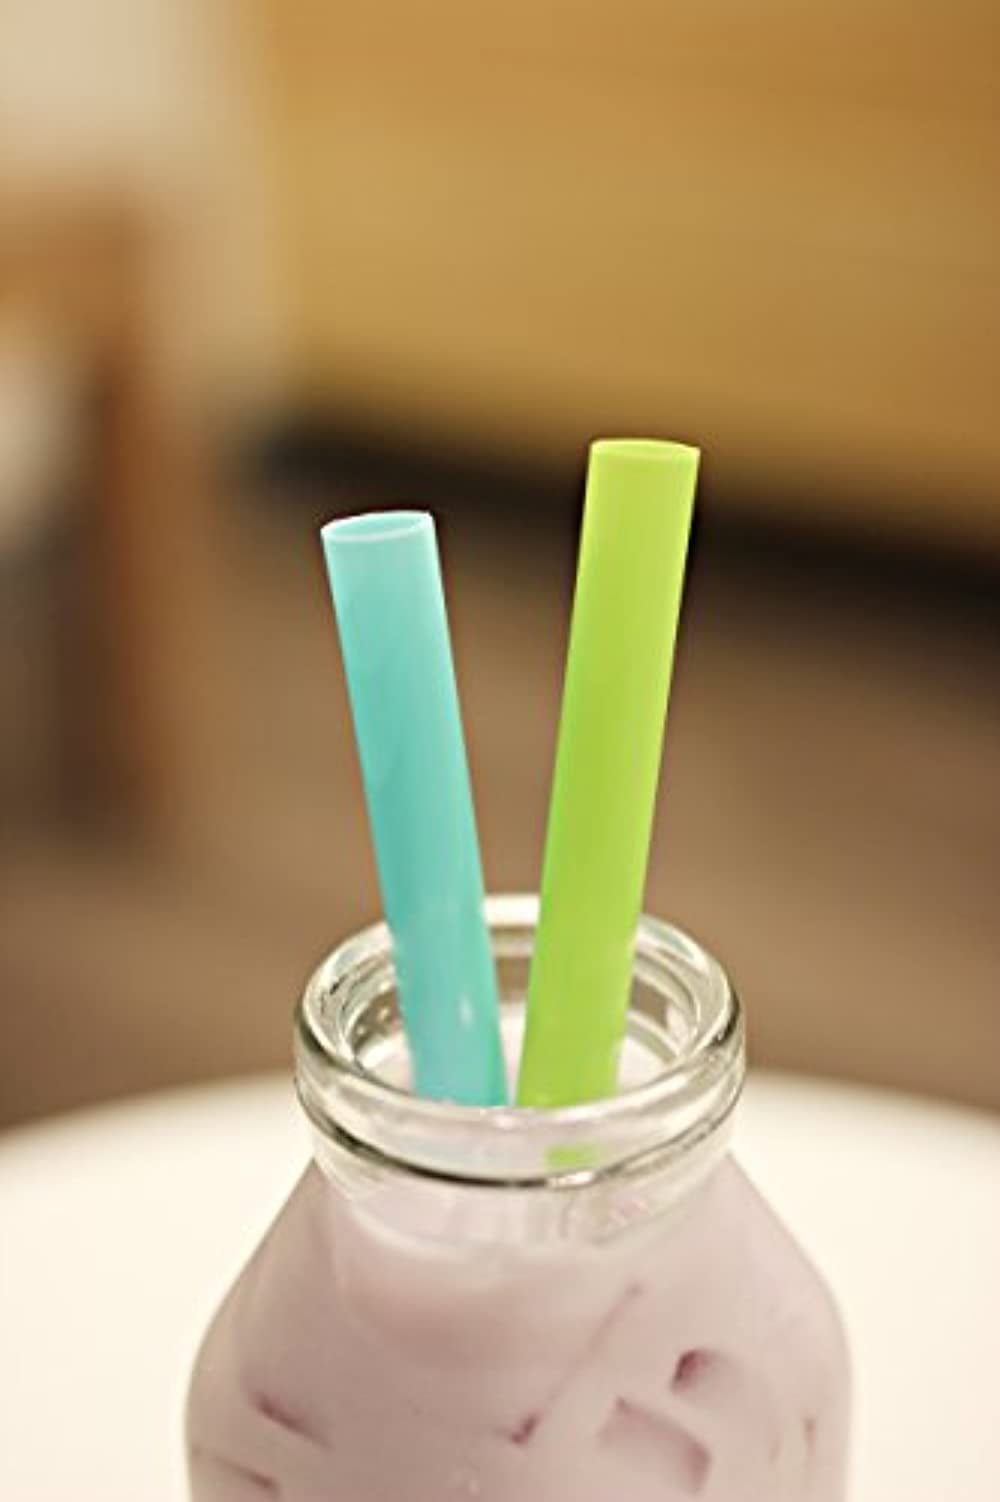 Choice 9 Black Extra Wide Pointed Wrapped Boba Straw - 1600/Case